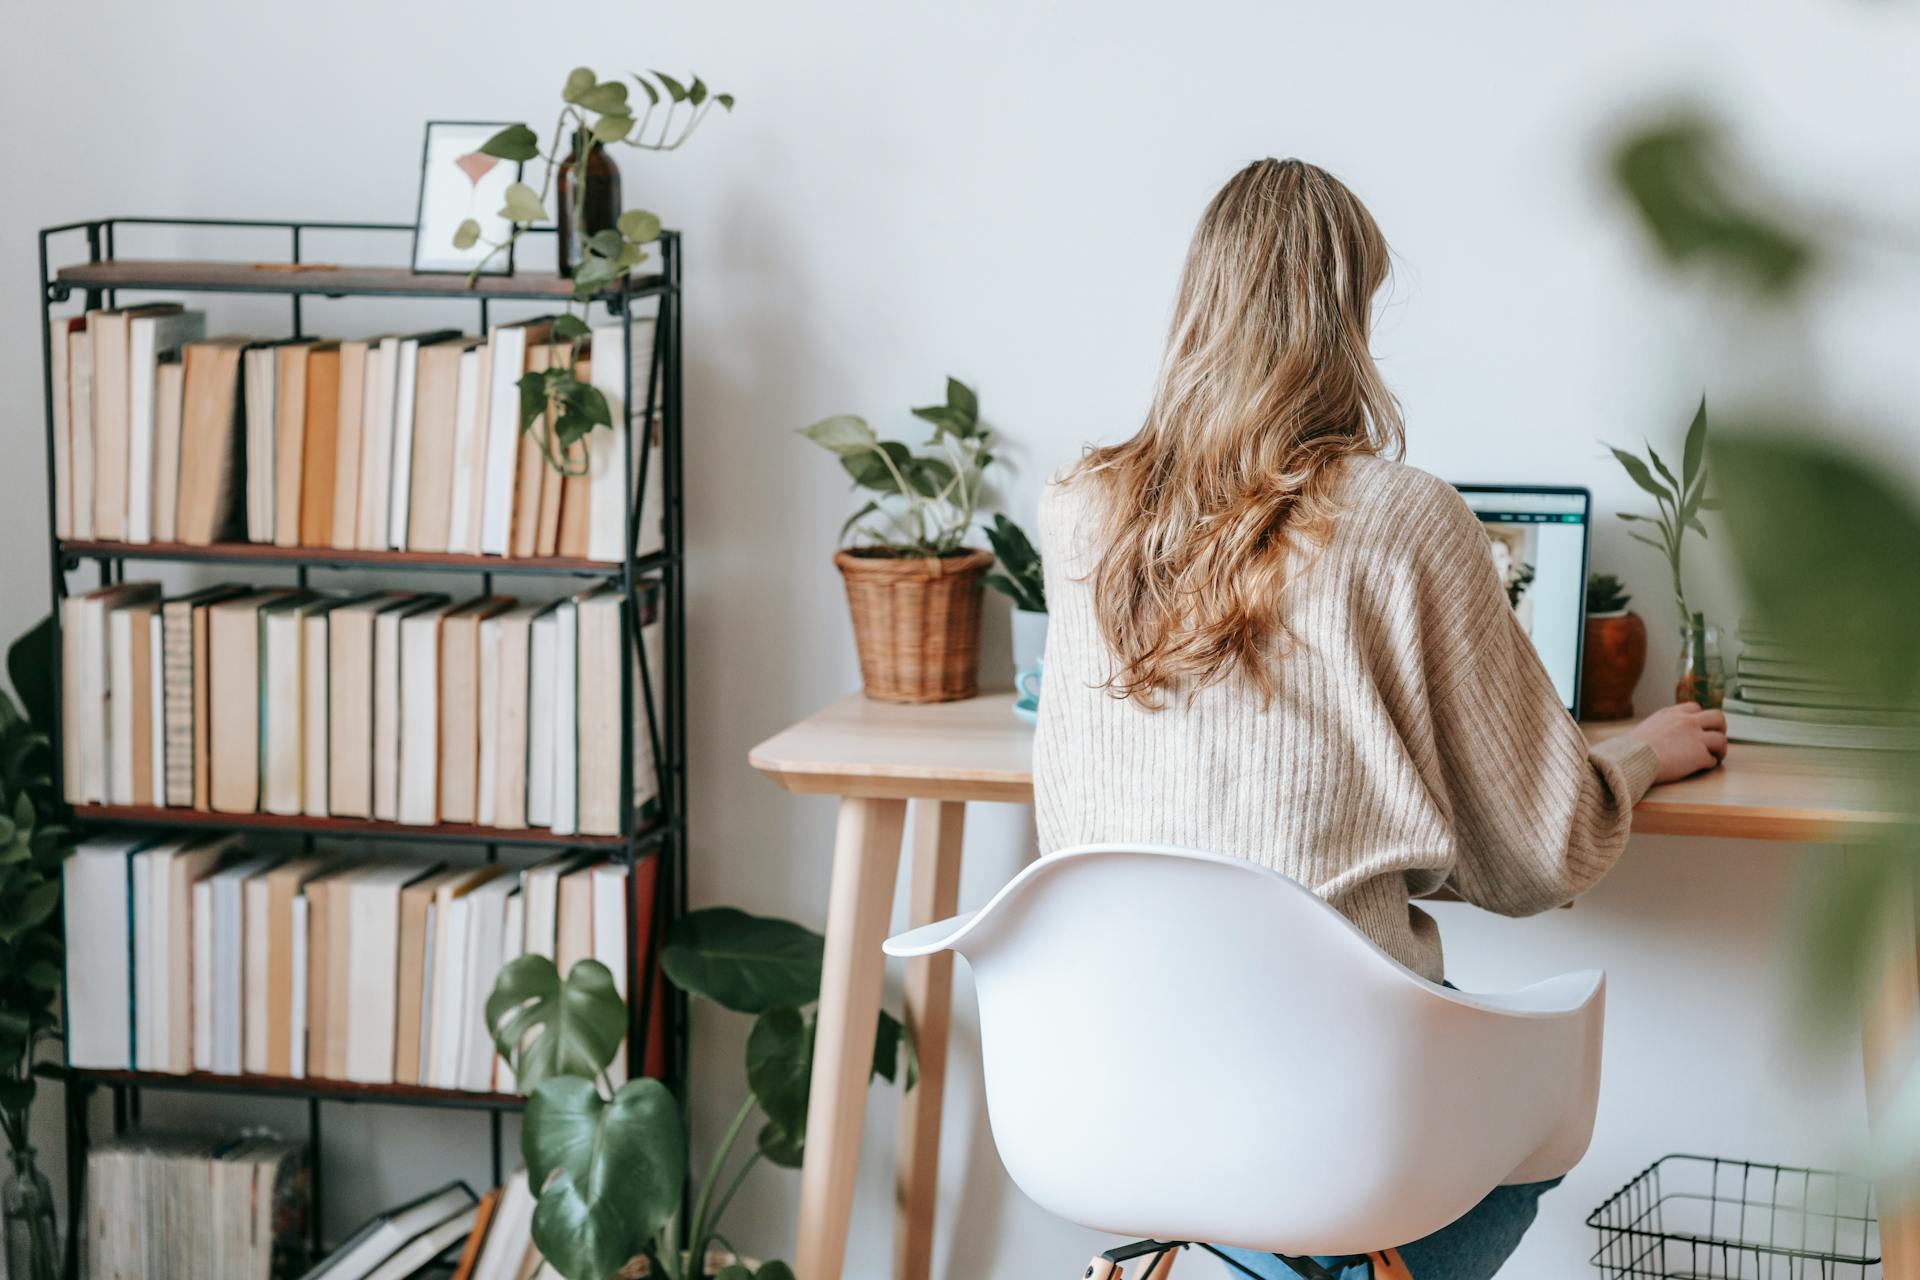 A back view of a woman using a laptop | Source: Pexels